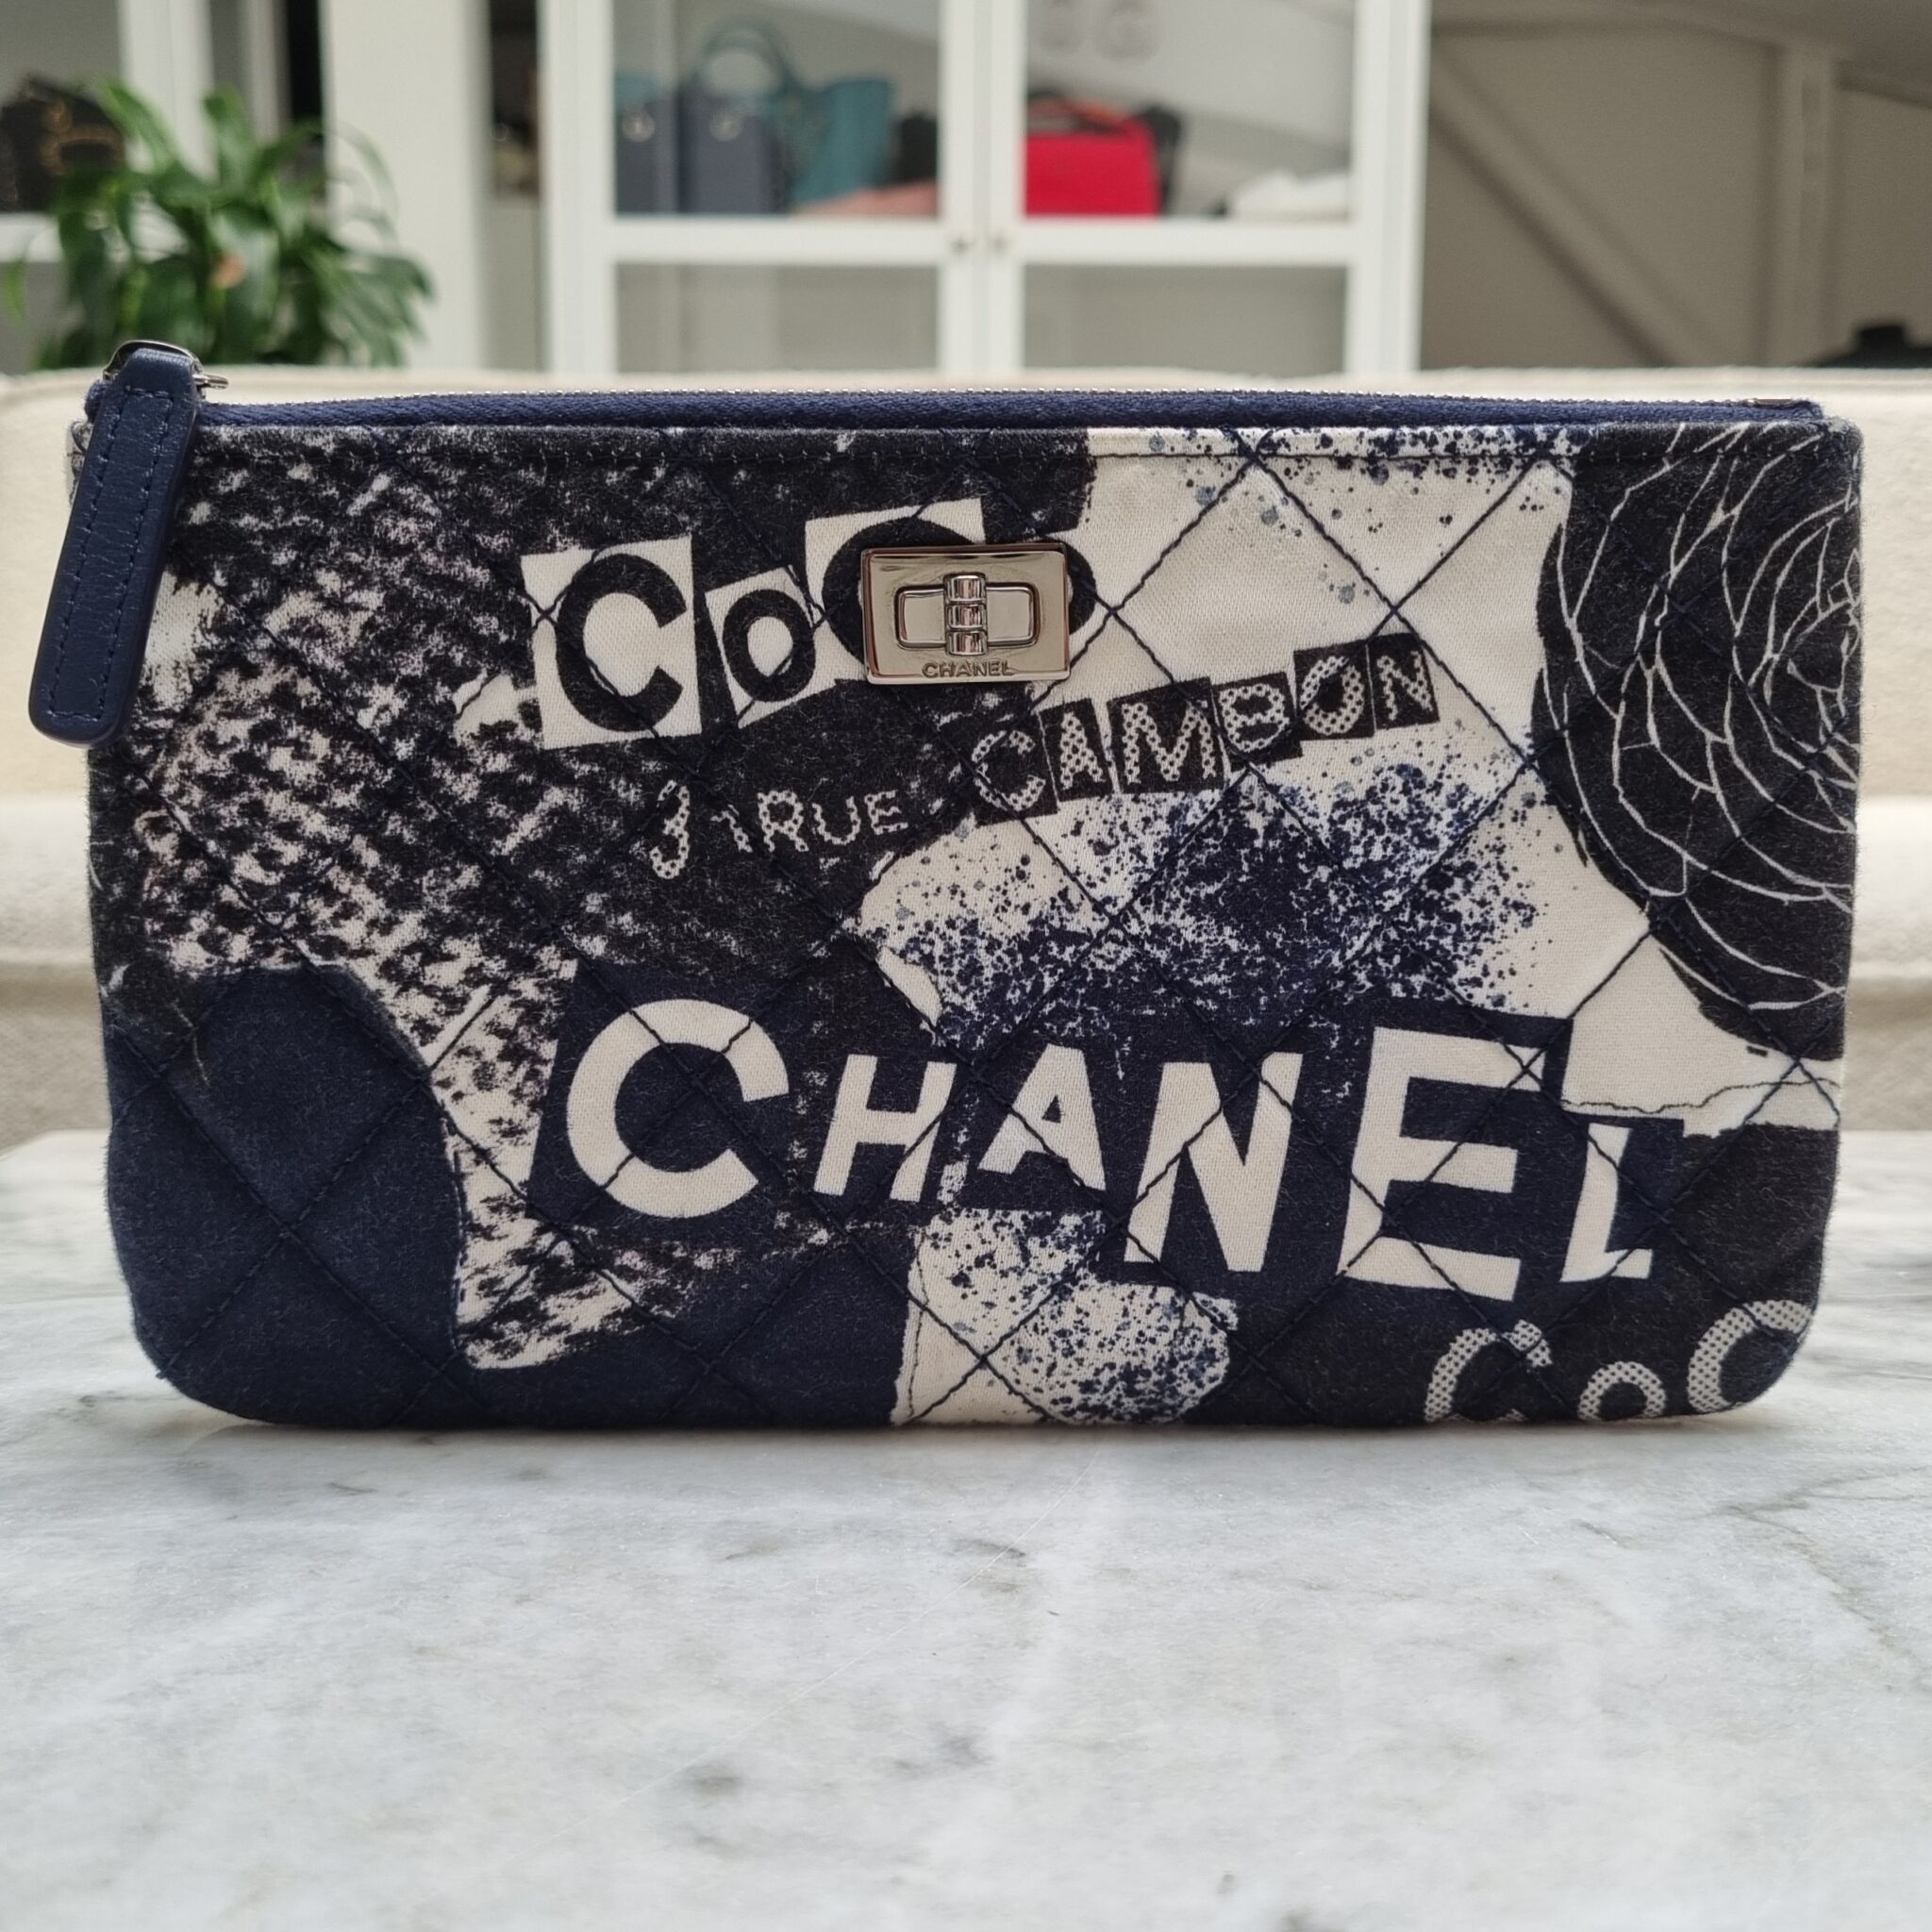 Chanel 2.55 Small Coco Print Pouch, Fabric, Black/White - Laulay Luxury